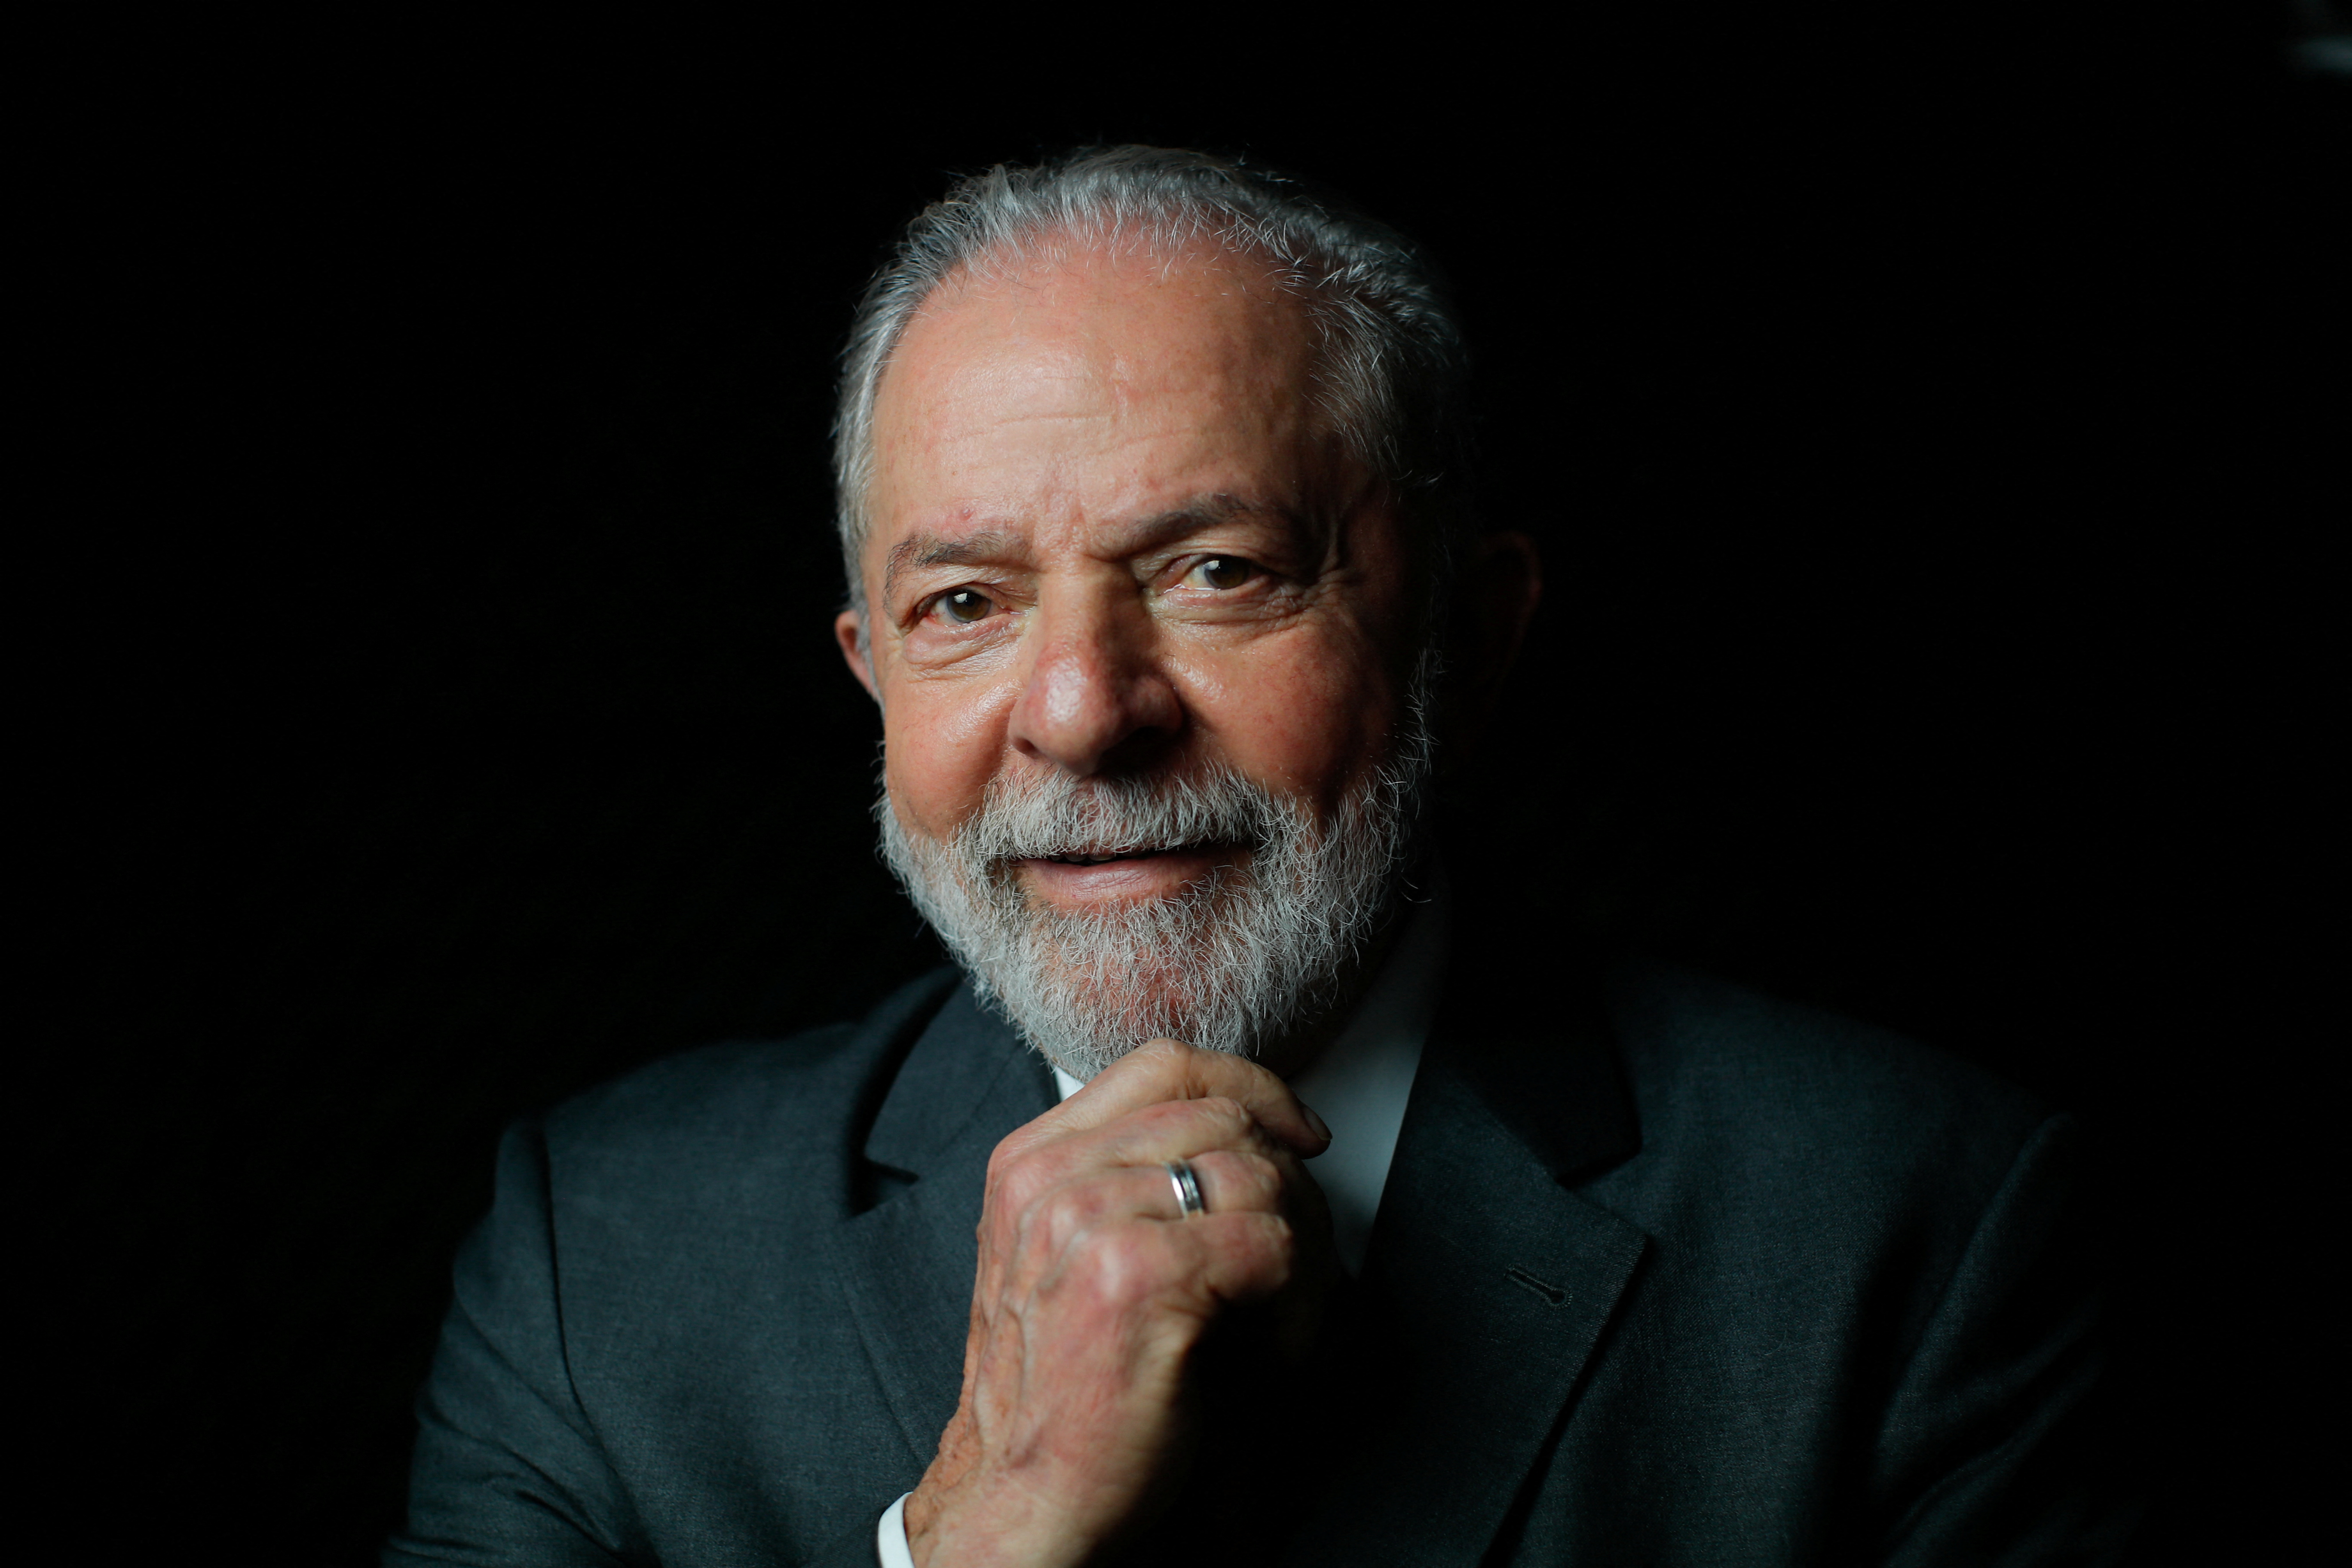 Former Brazilian President Luiz Inacio Lula da Silva poses for a picture during an interview with Reuters in Sao Paulo